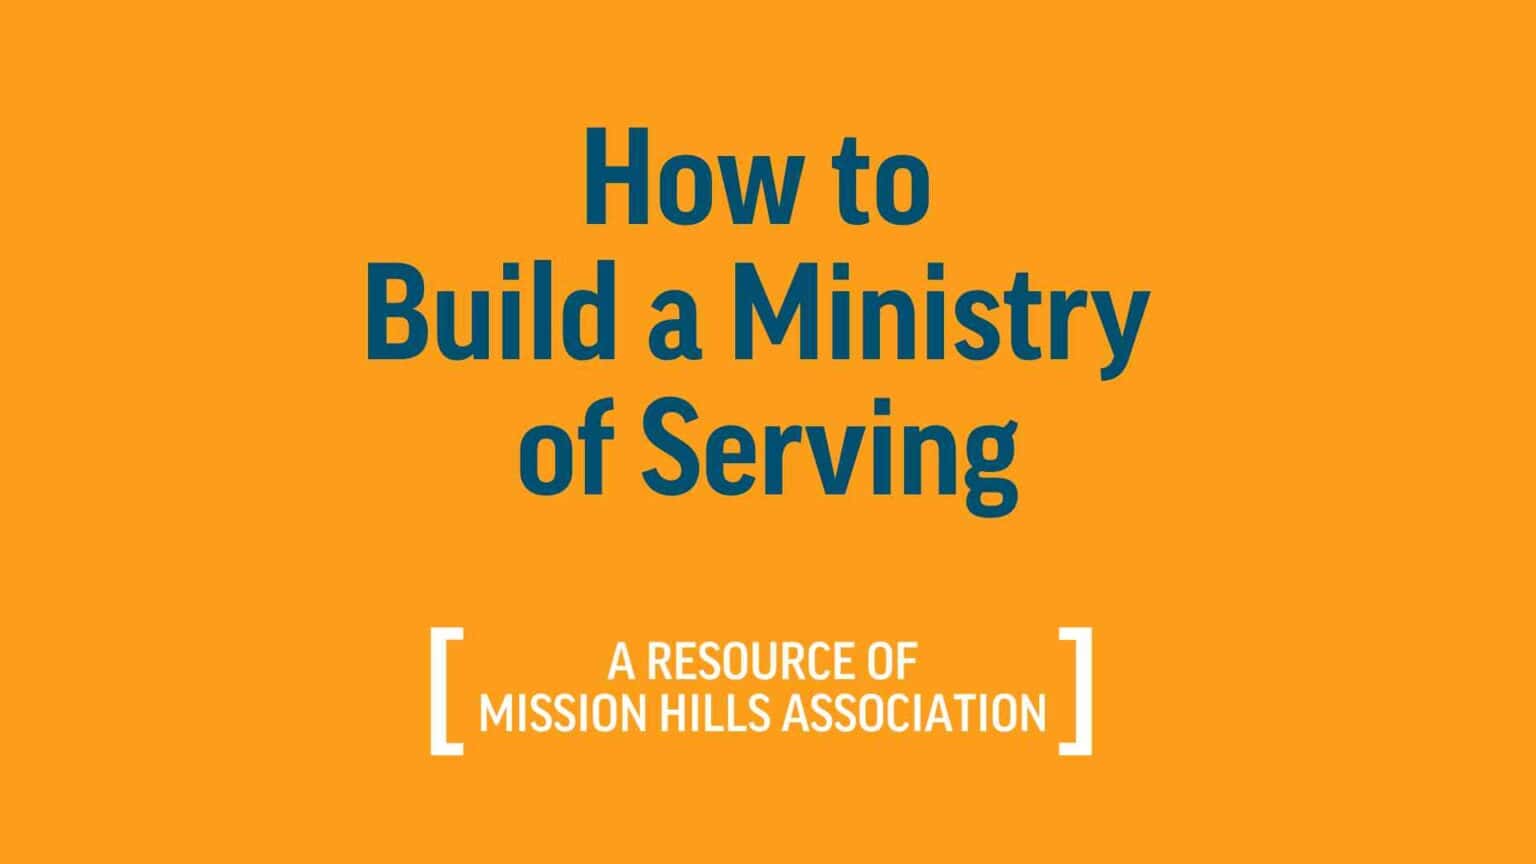 How to Build a Ministry of Serving